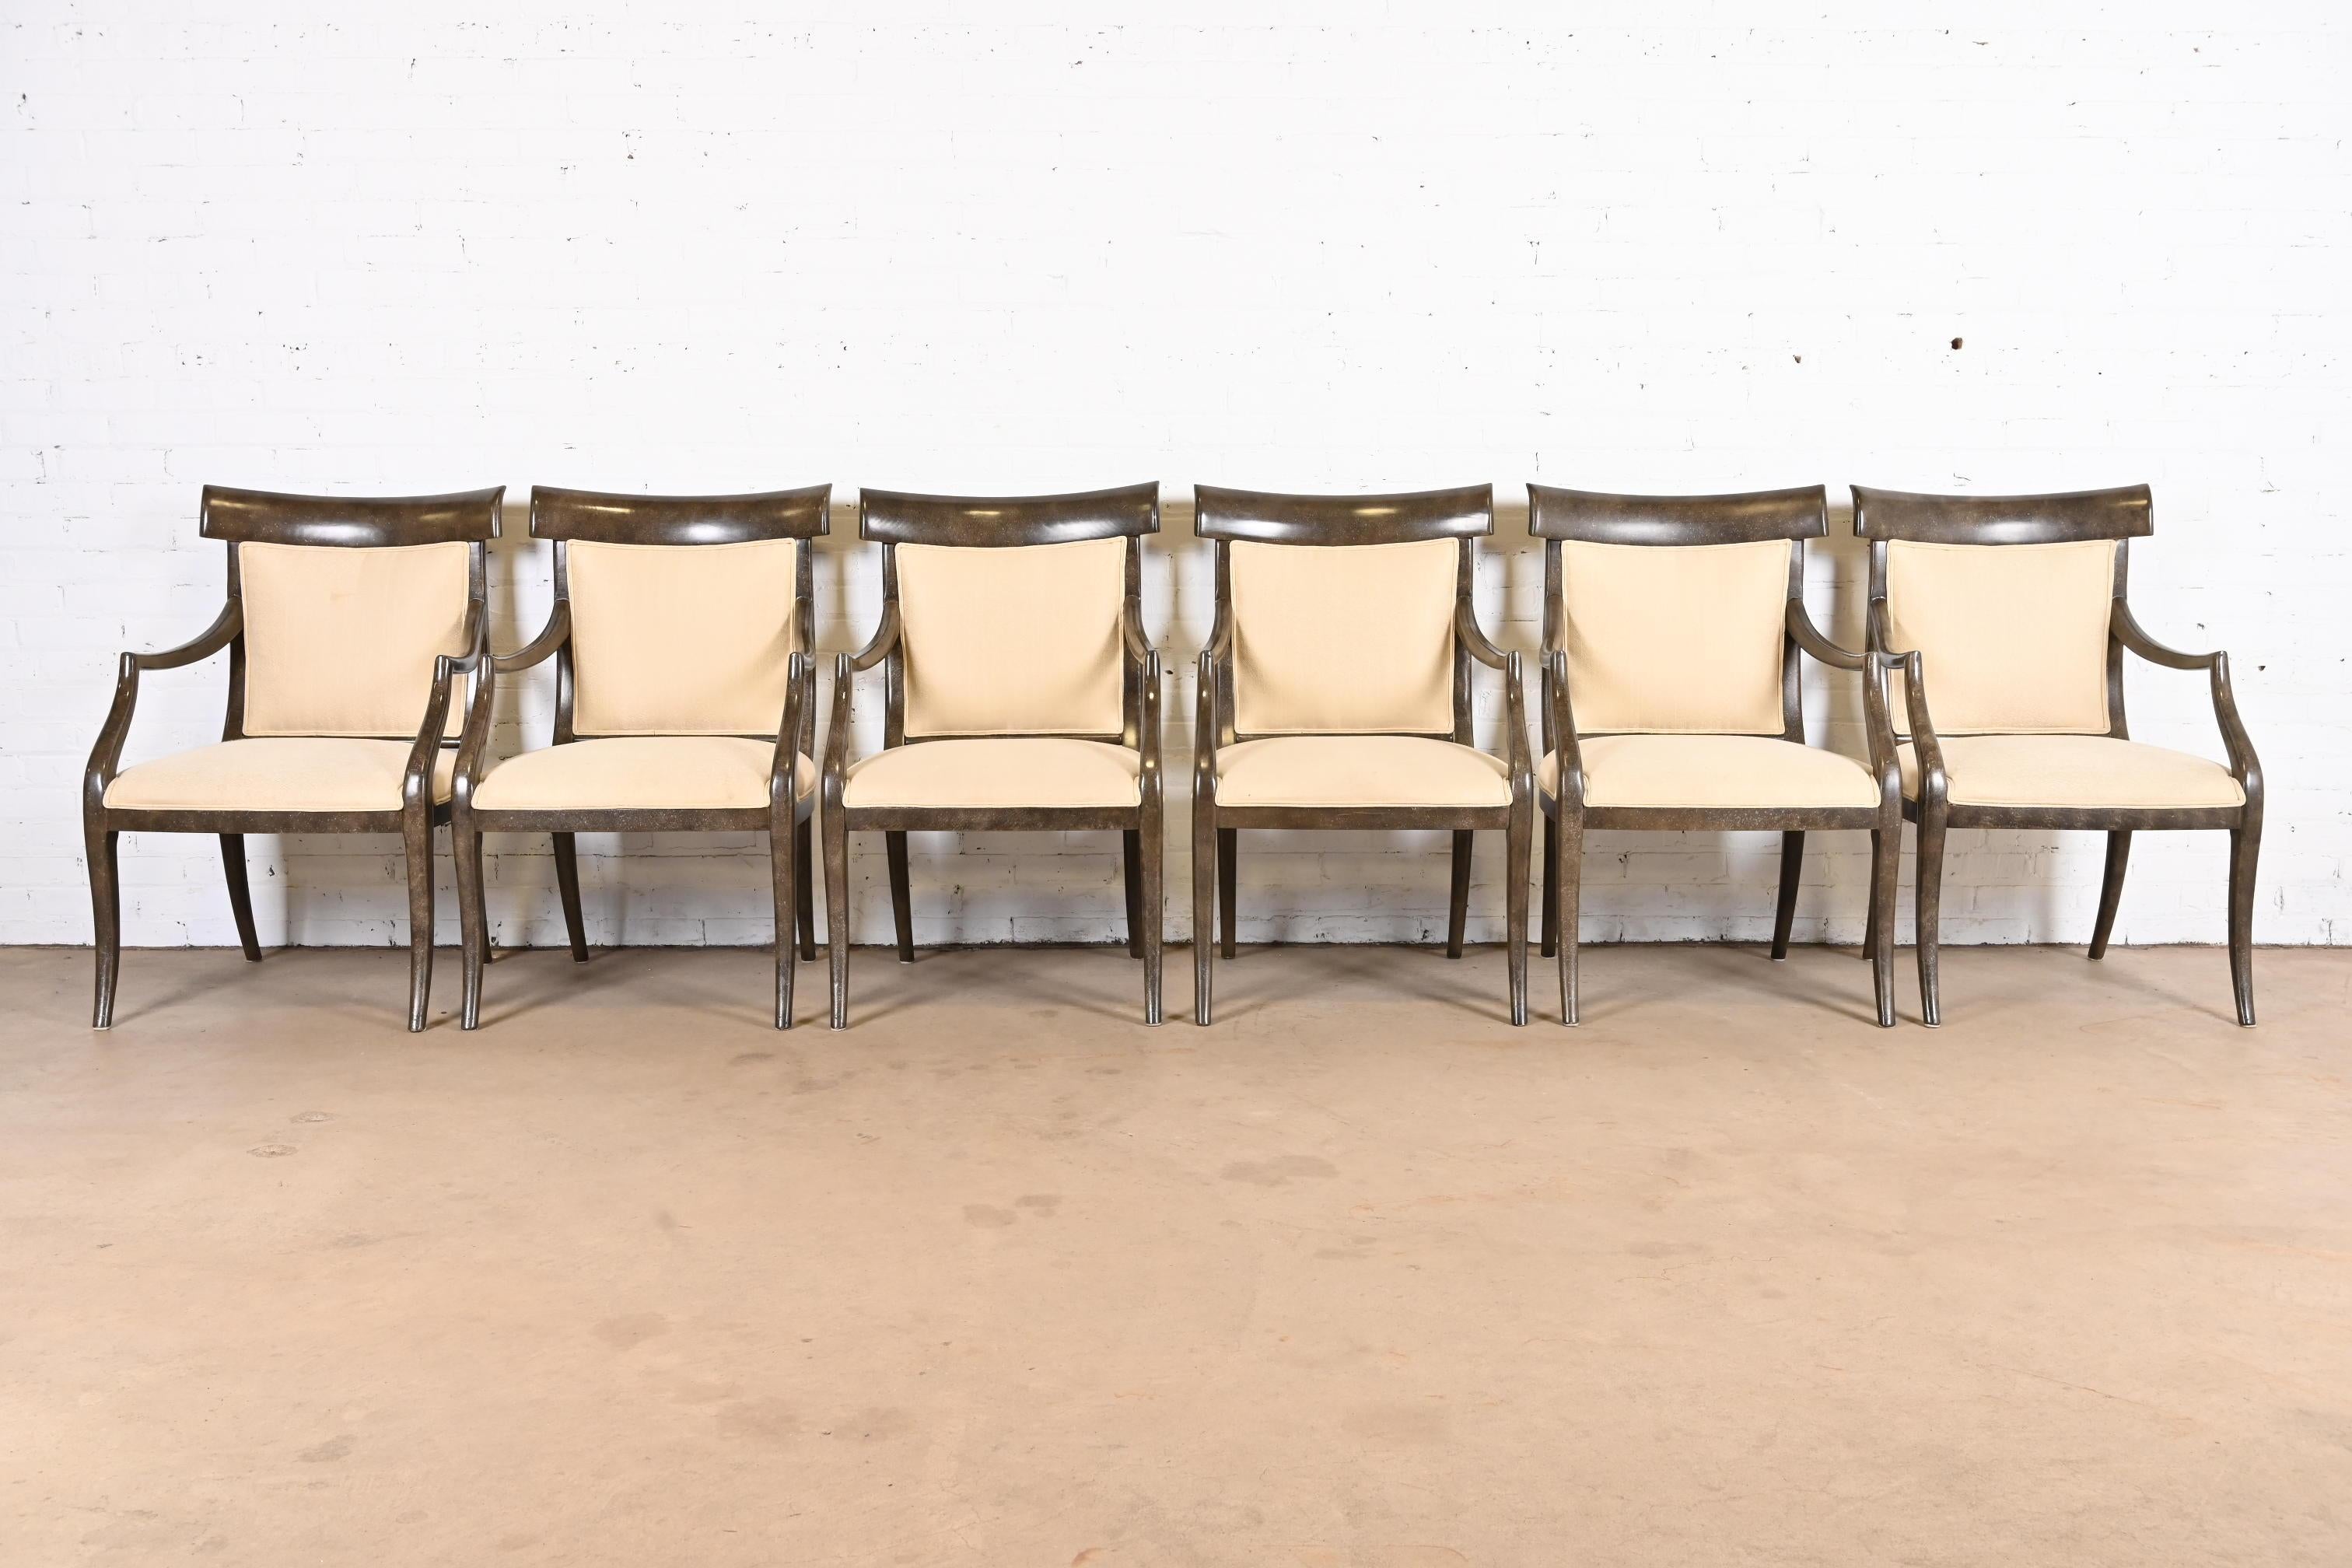 
A gorgeous set of six modern Regency style dining armchairs
By Ferguson Copeland
USA, Late 20th century
Elegant carved wood frames in gray finish, with cream upholstered seats and backs.
Measures: 23.75